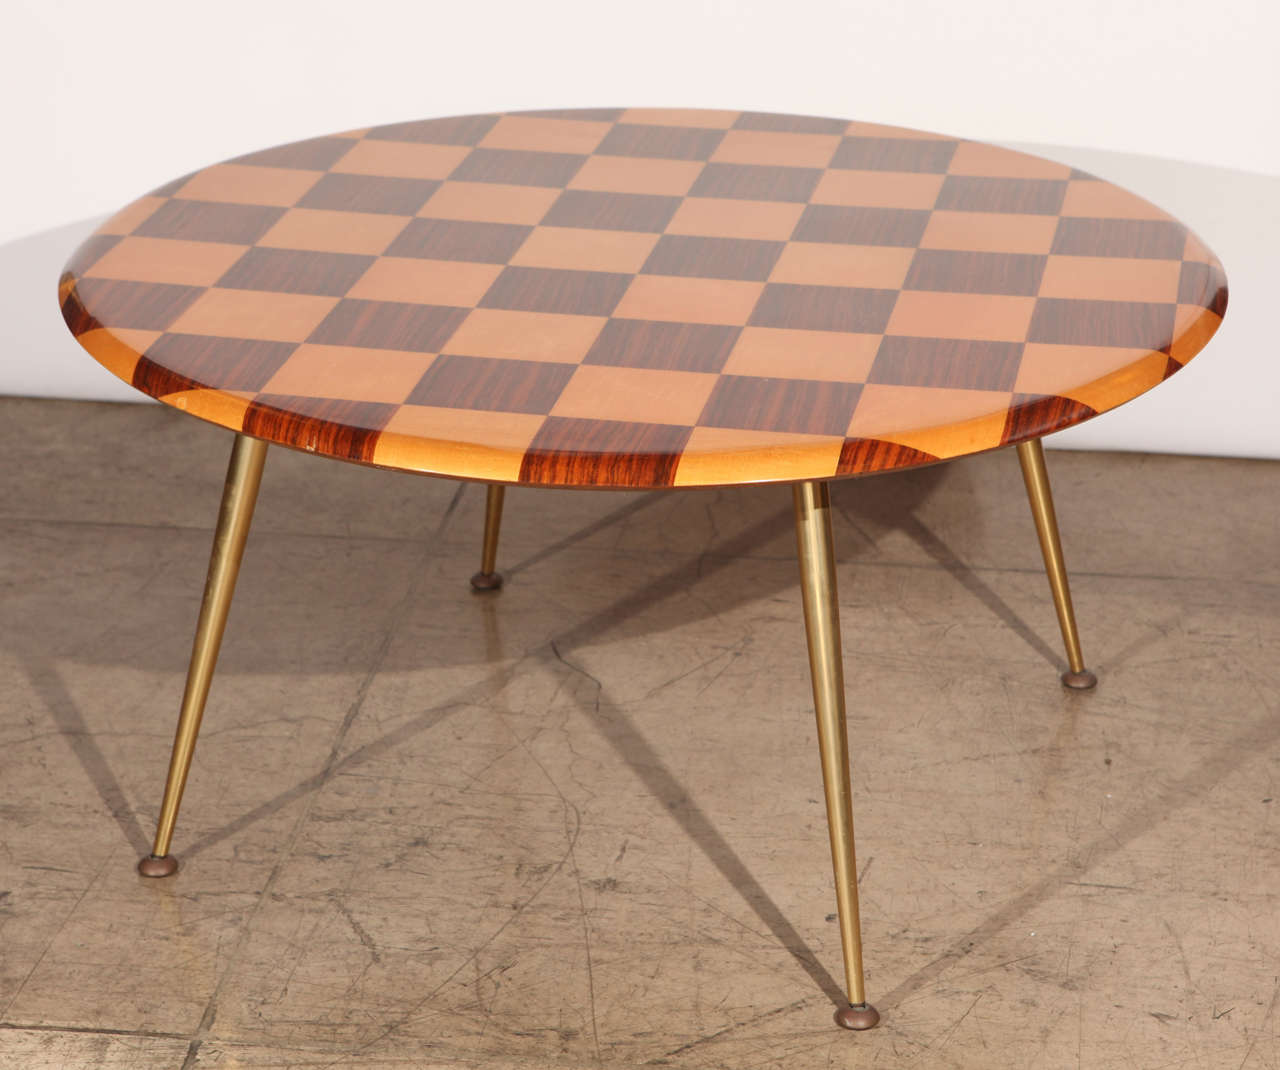 A mid century Italian checkered table. Made of sycamore and rosewood veneer on brass legs. Please note there is a slight veneer flaw on the edge of the table top.